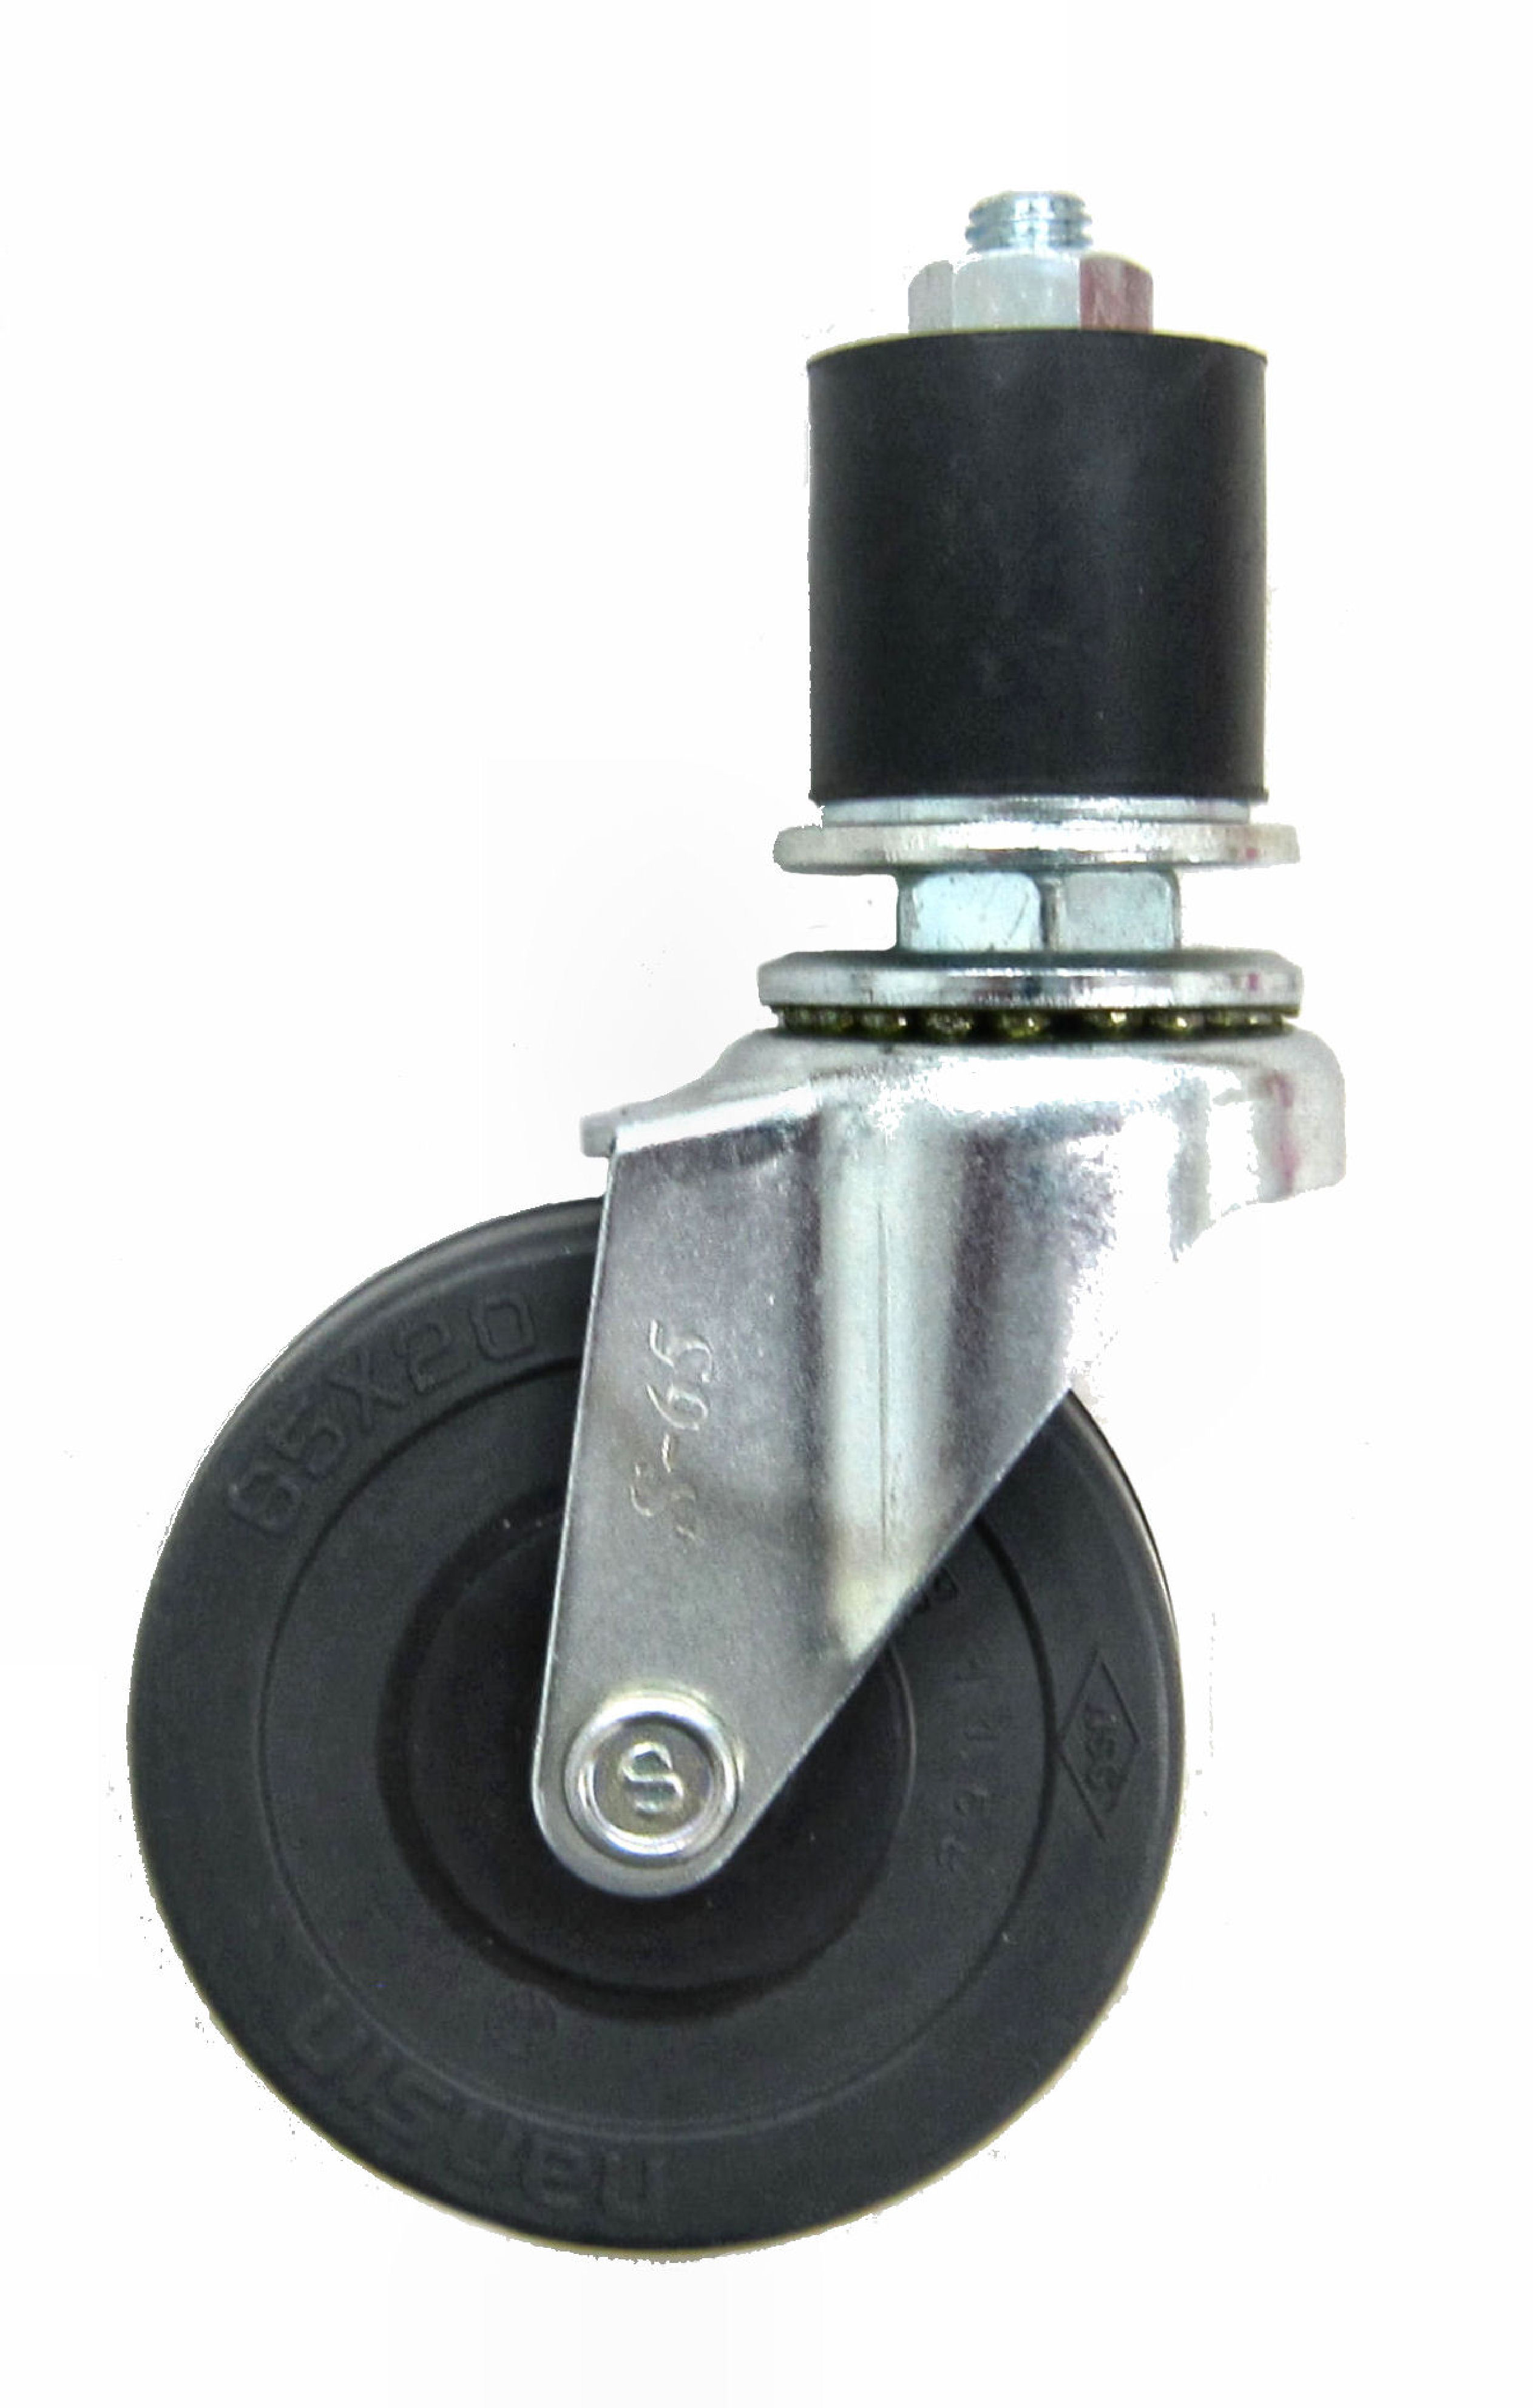 Casters - Plastic, for joints, plug type (light loads).